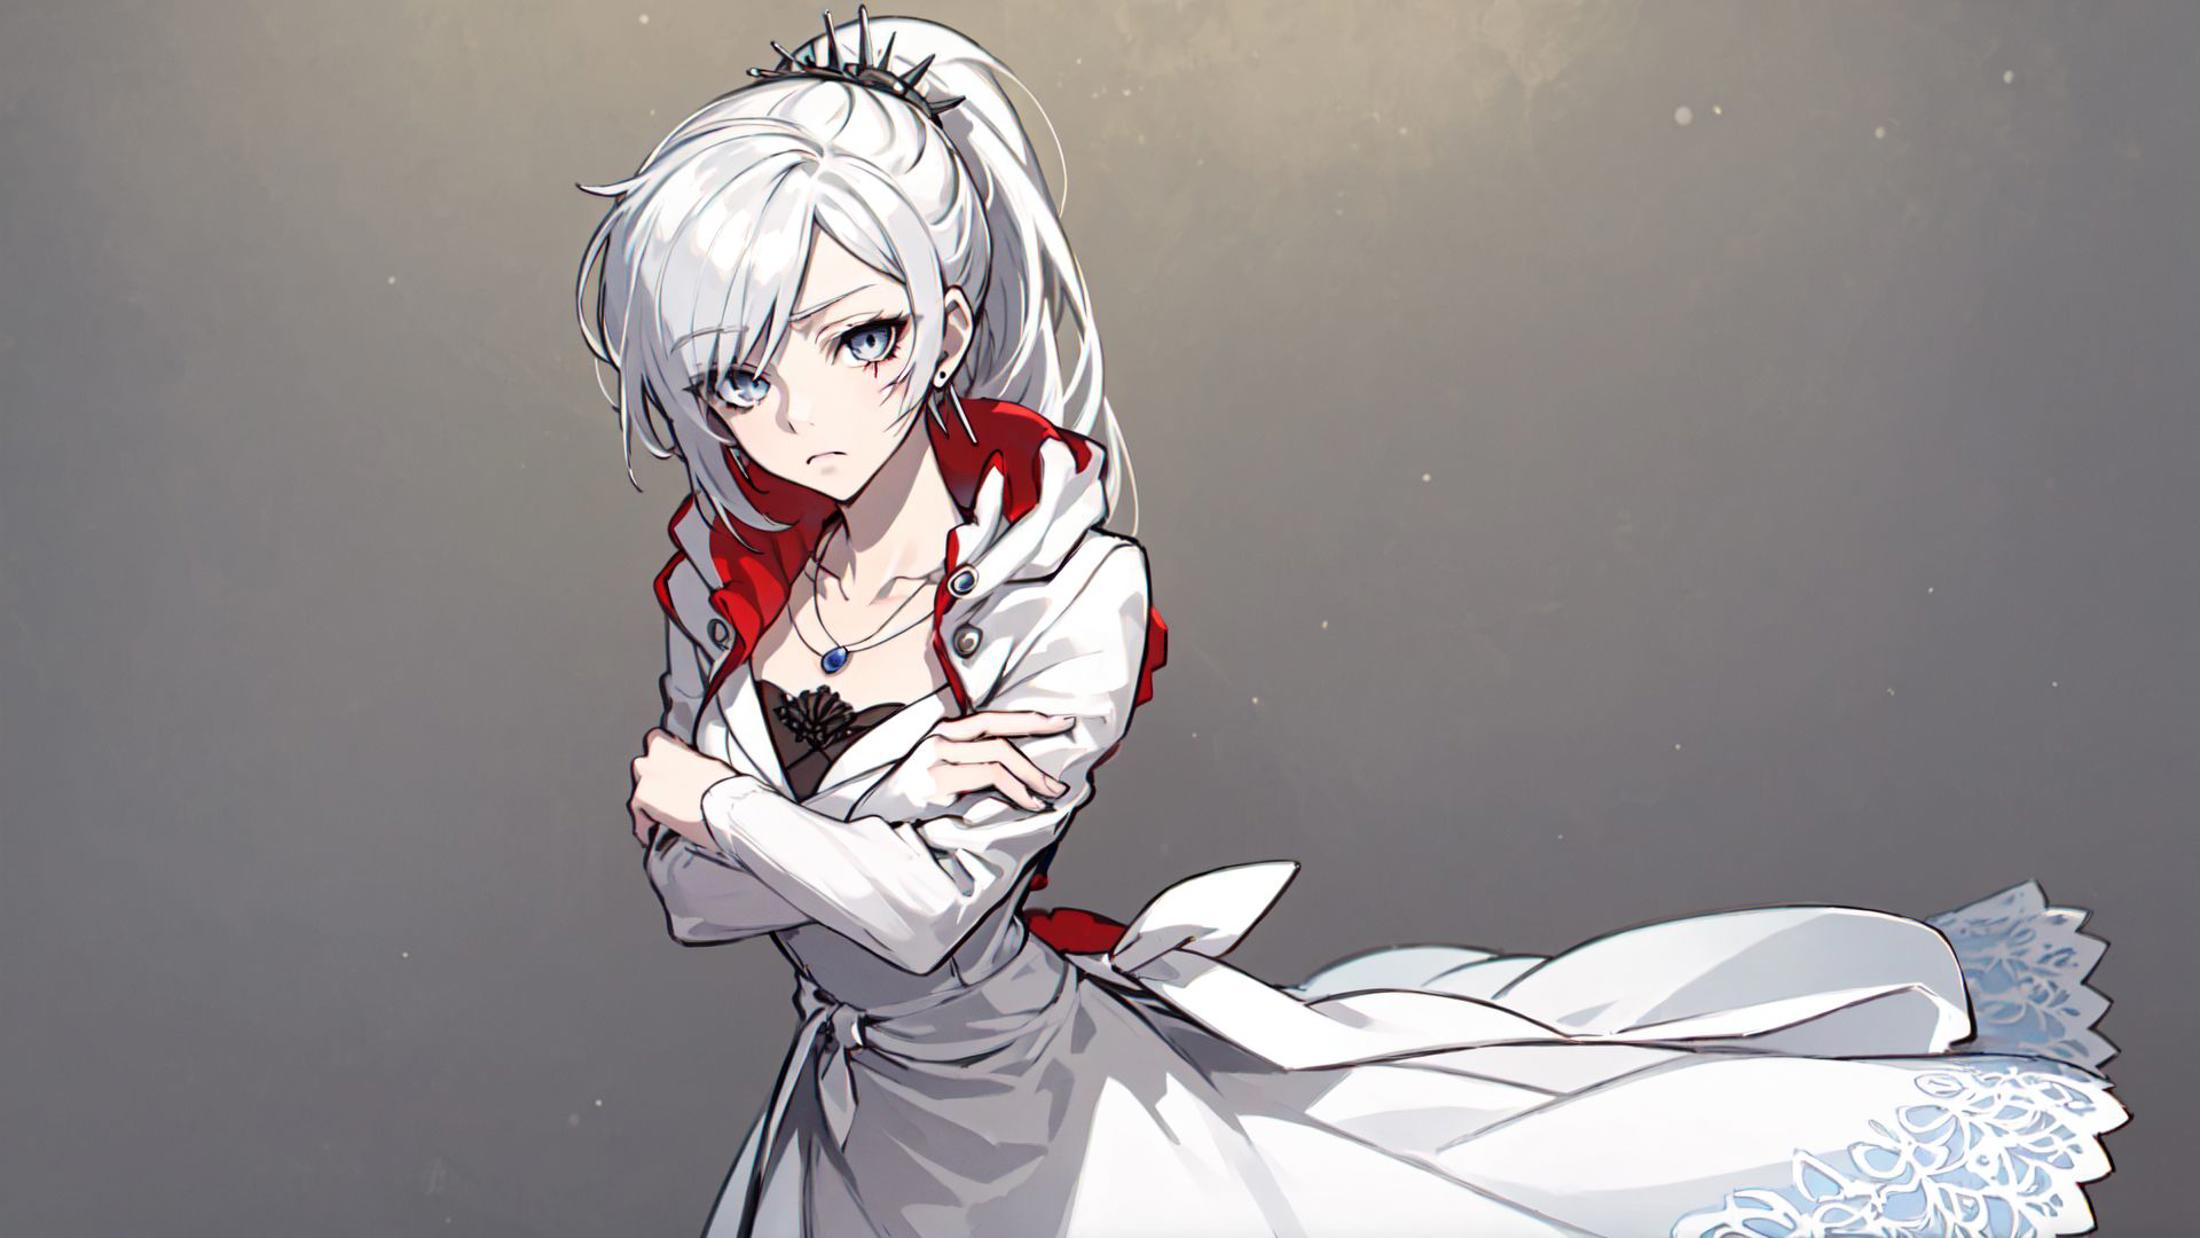 Weiss Schnee | RWBY image by marusame